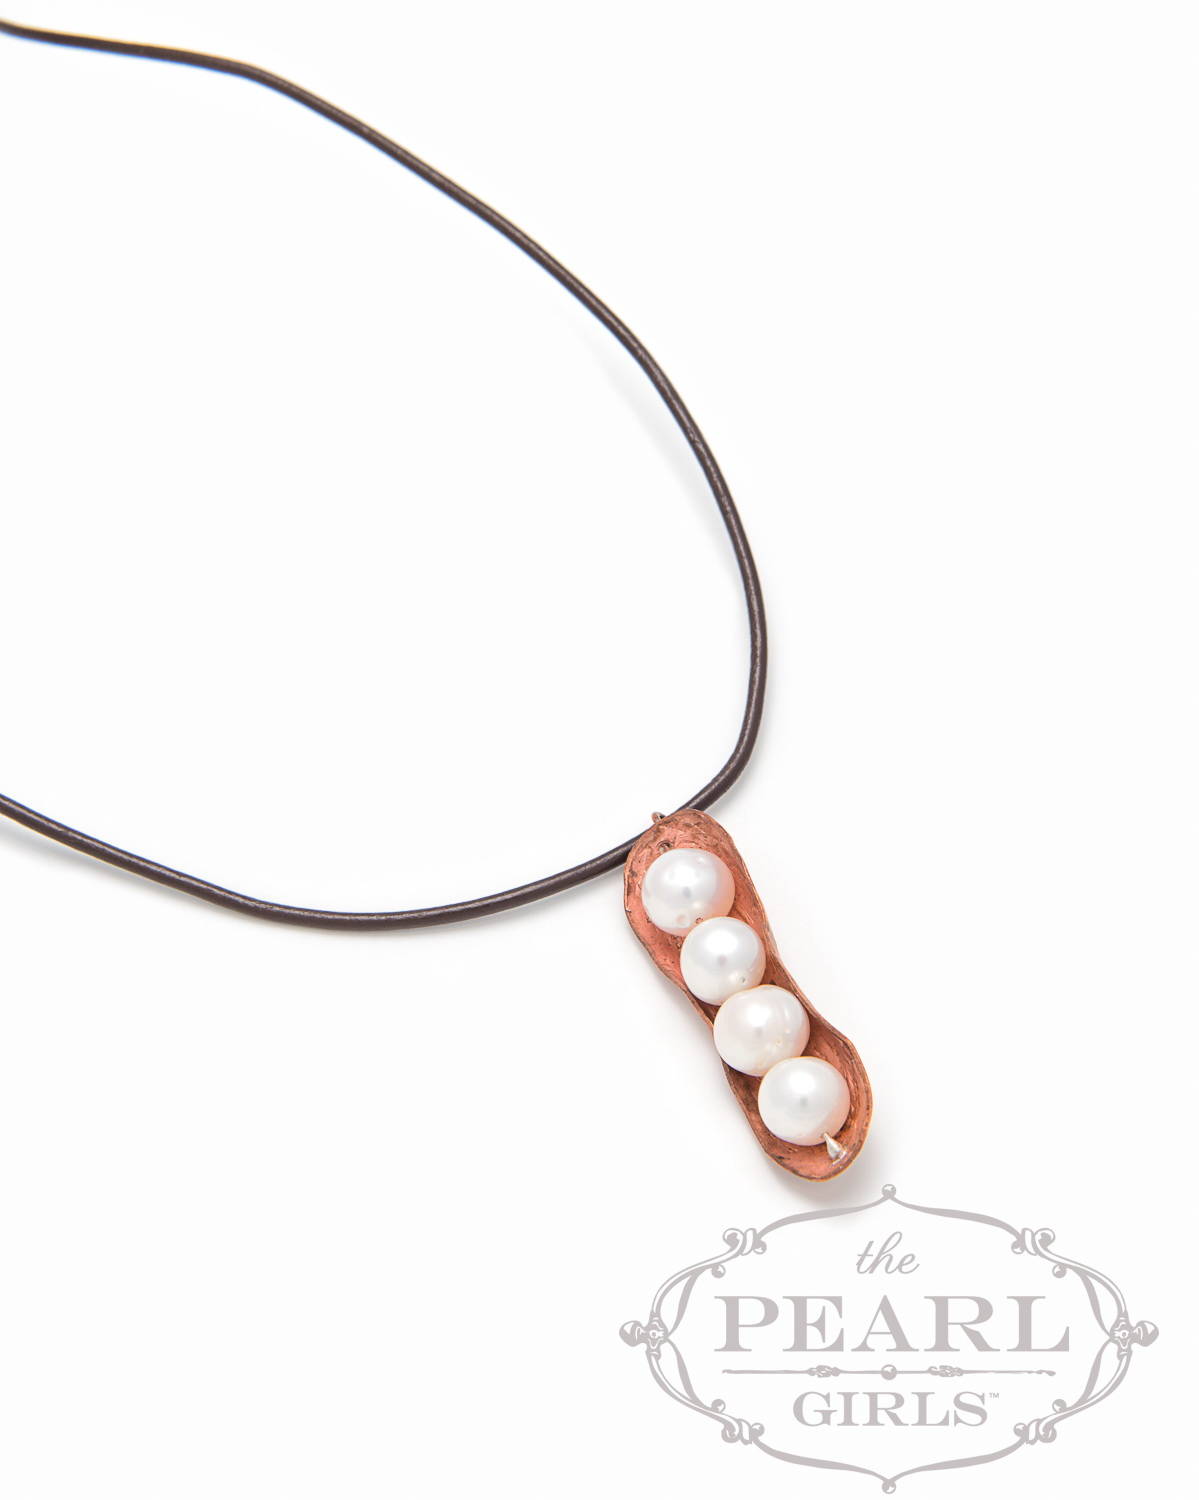 Peanut Pearls Necklace by Sylvia Dawe (Sterling Silver Peanut, Large Off-Round 9mm Pearls)